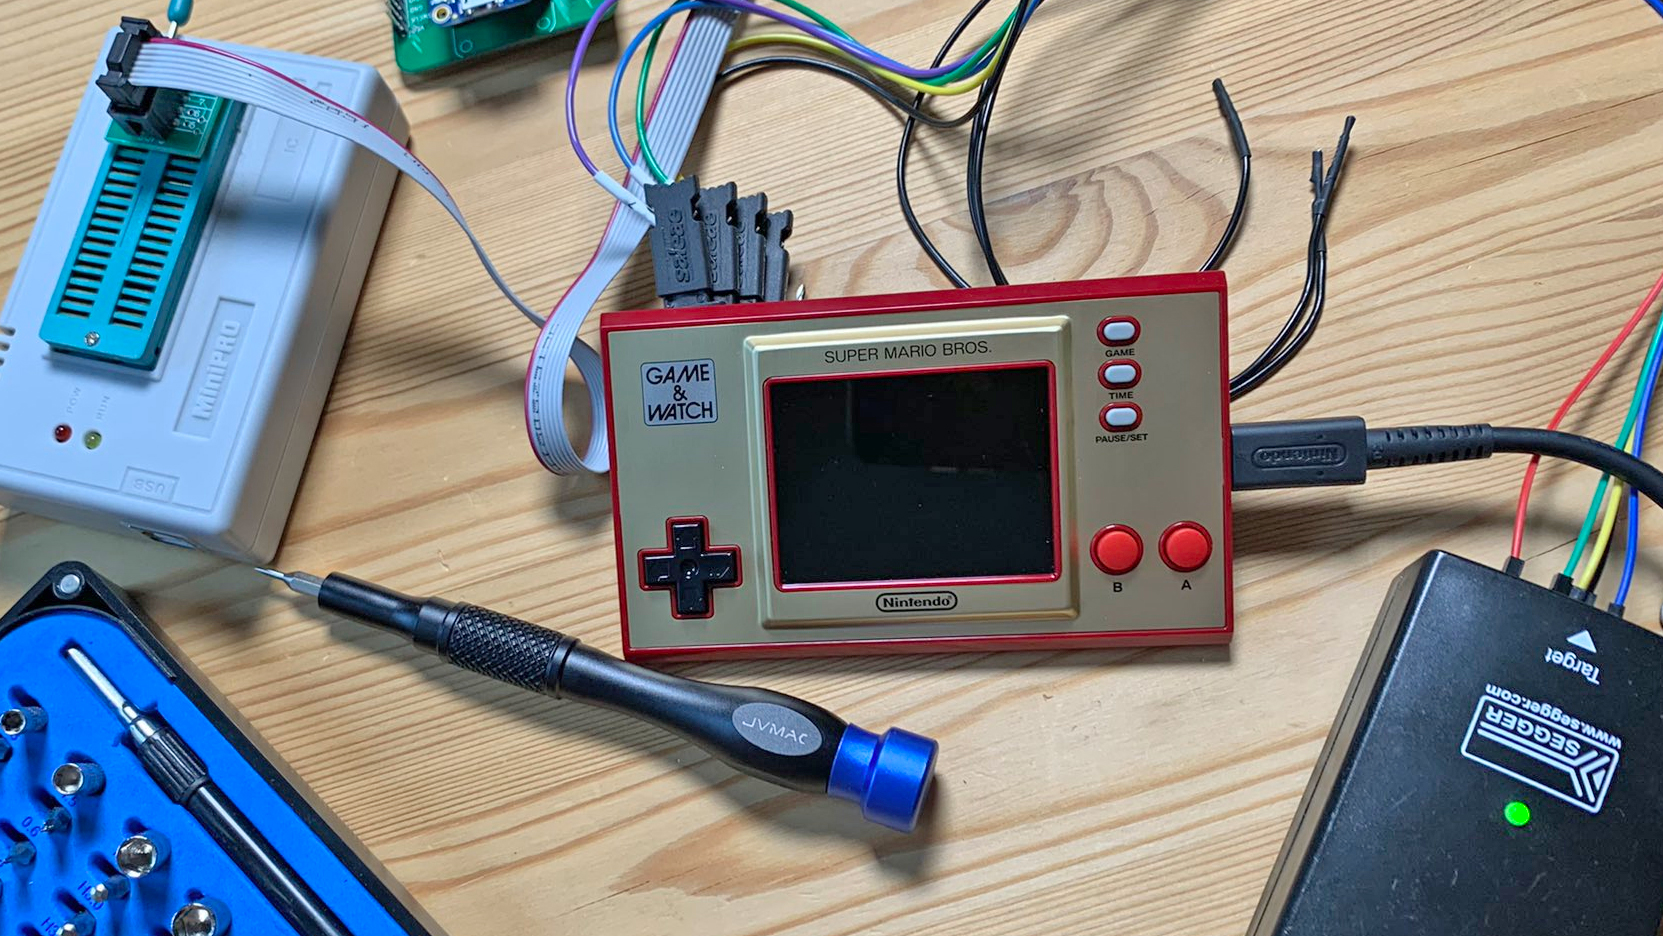 Nintendo’s New Game & Watch Hacked a Day Before It’s Official Release